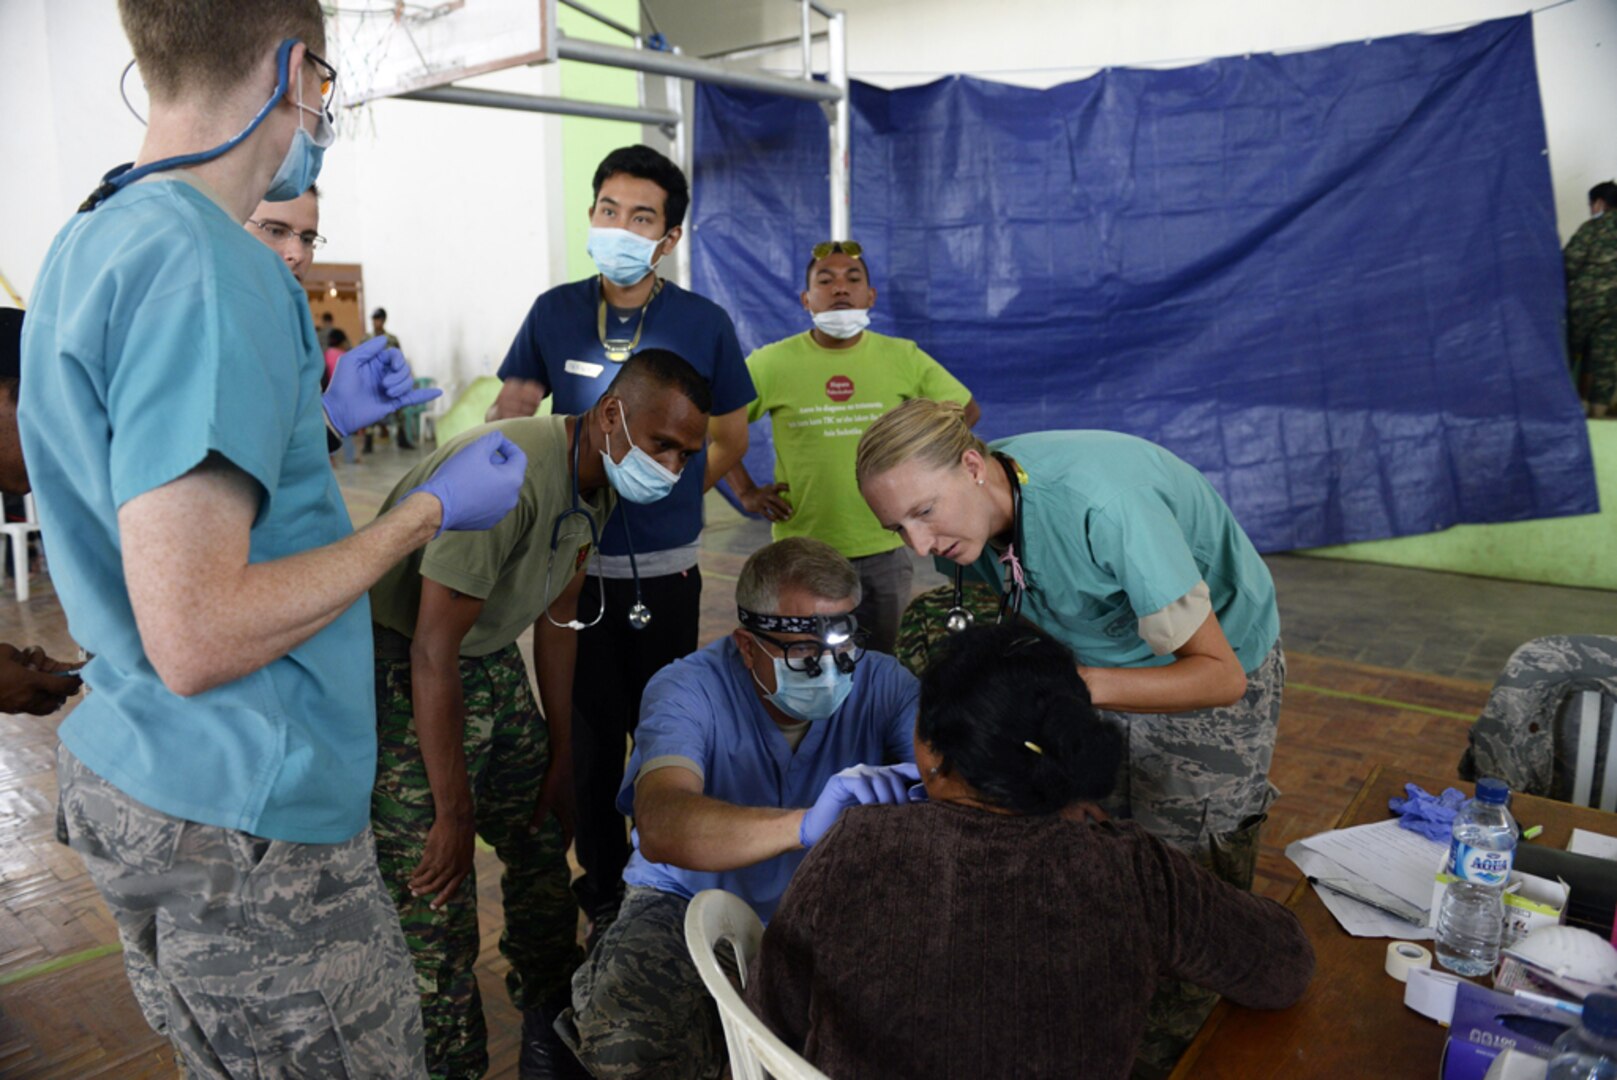 Pacific Angel 15-2 general practice physicians and dentists take a look at a patient's oral sore during a health services outreach Sept. 11, 2015, in Baucau, Timor-Leste. Pacific Angel is a multilateral humanitarian assistance civil military operation, which improves military-to-military partnerships in the Pacific while also providing medical health outreach, civic engineering projects and subject matter exchanges among partner forces. (U.S. Air Force photo by Staff Sgt. Alexander W. Riedel/Released)